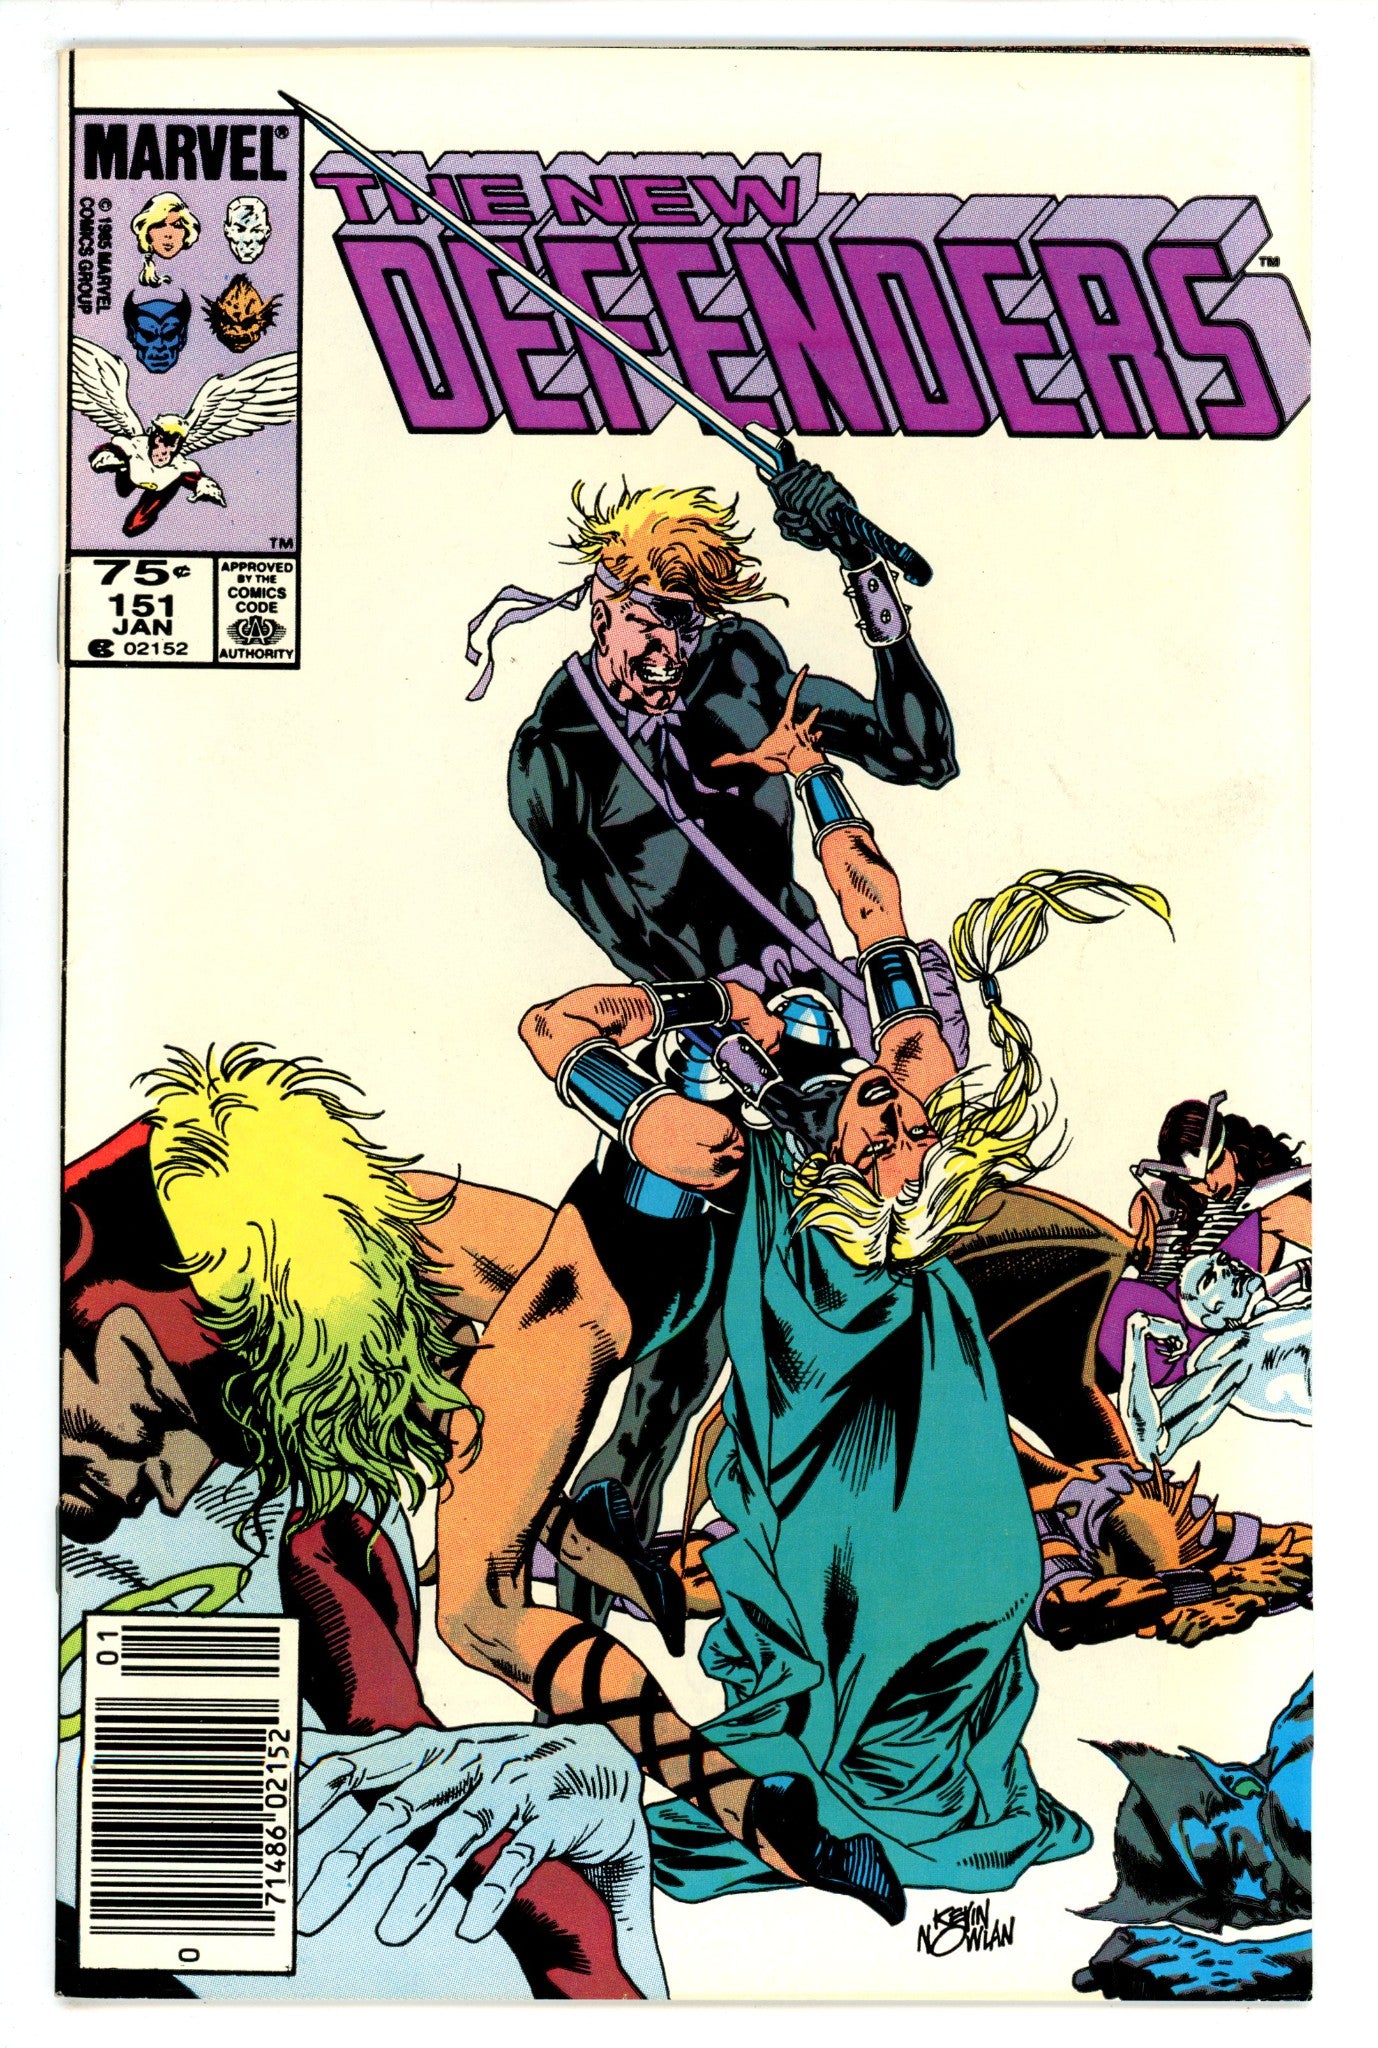 The Defenders Vol 1 151 VF+ (8.5) (1986) Canadian Price Variant 